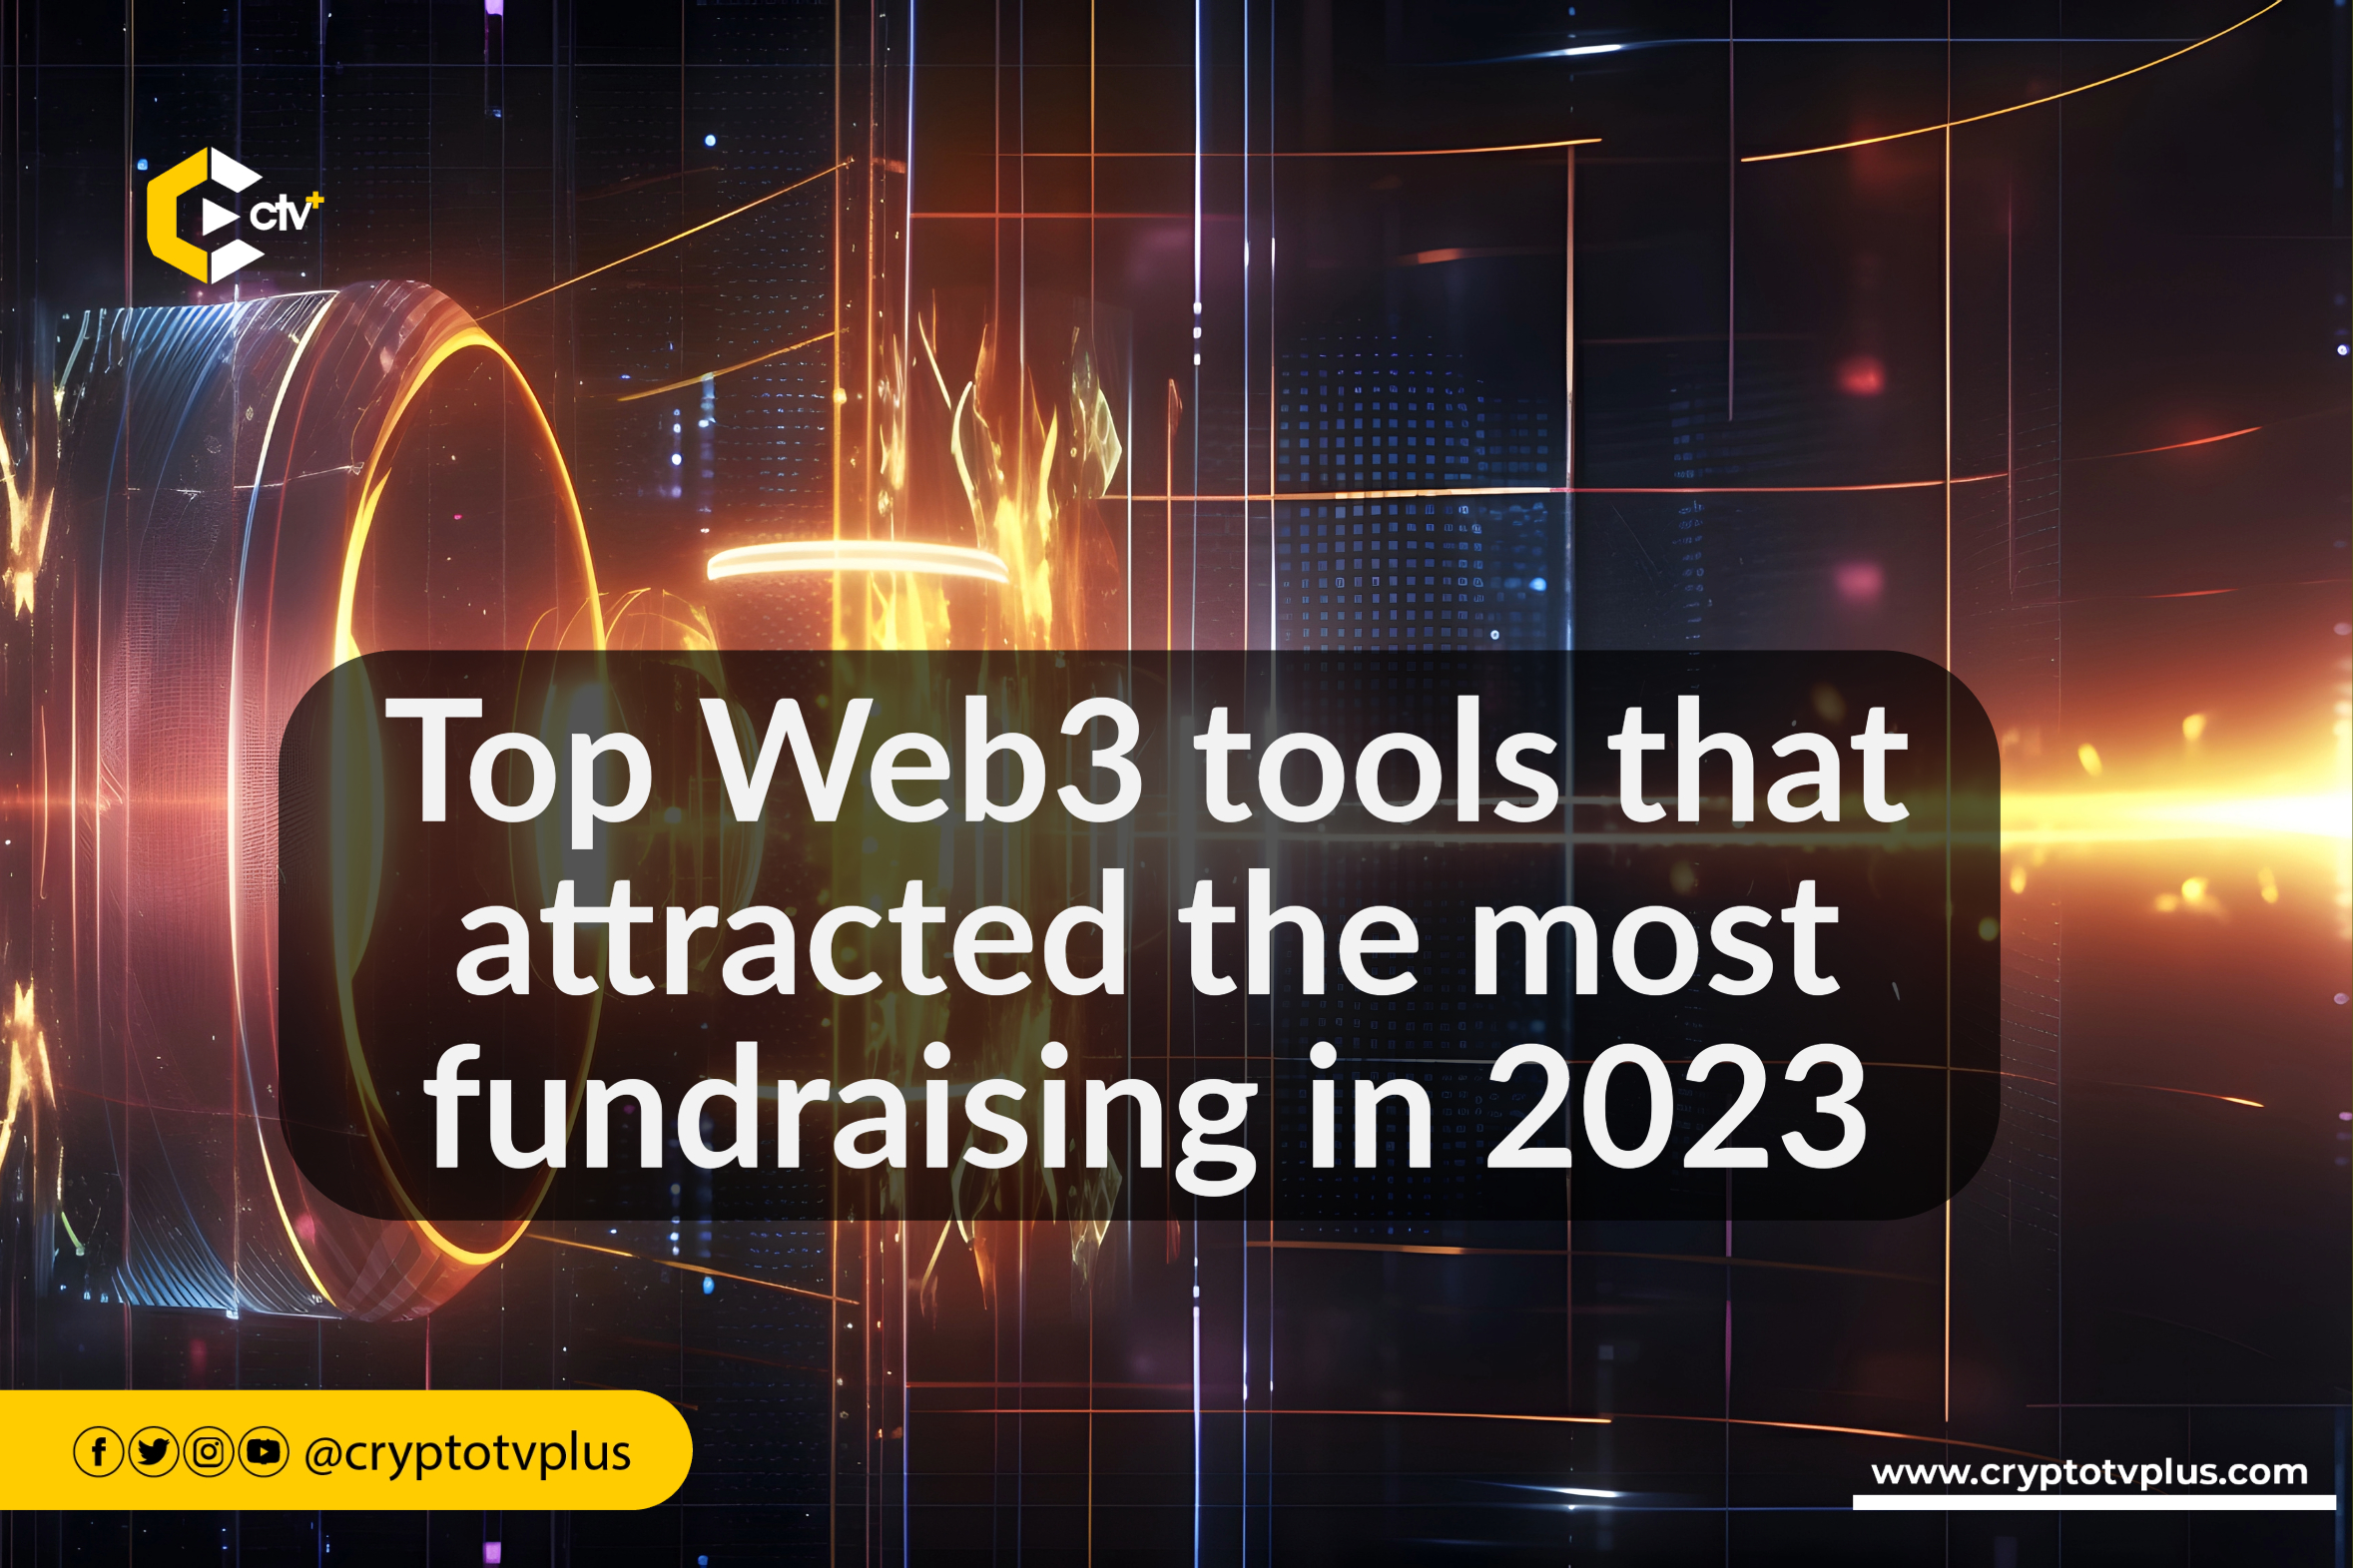 The Top 10 Trends Shaping The Web3 Ecosystem In 2023